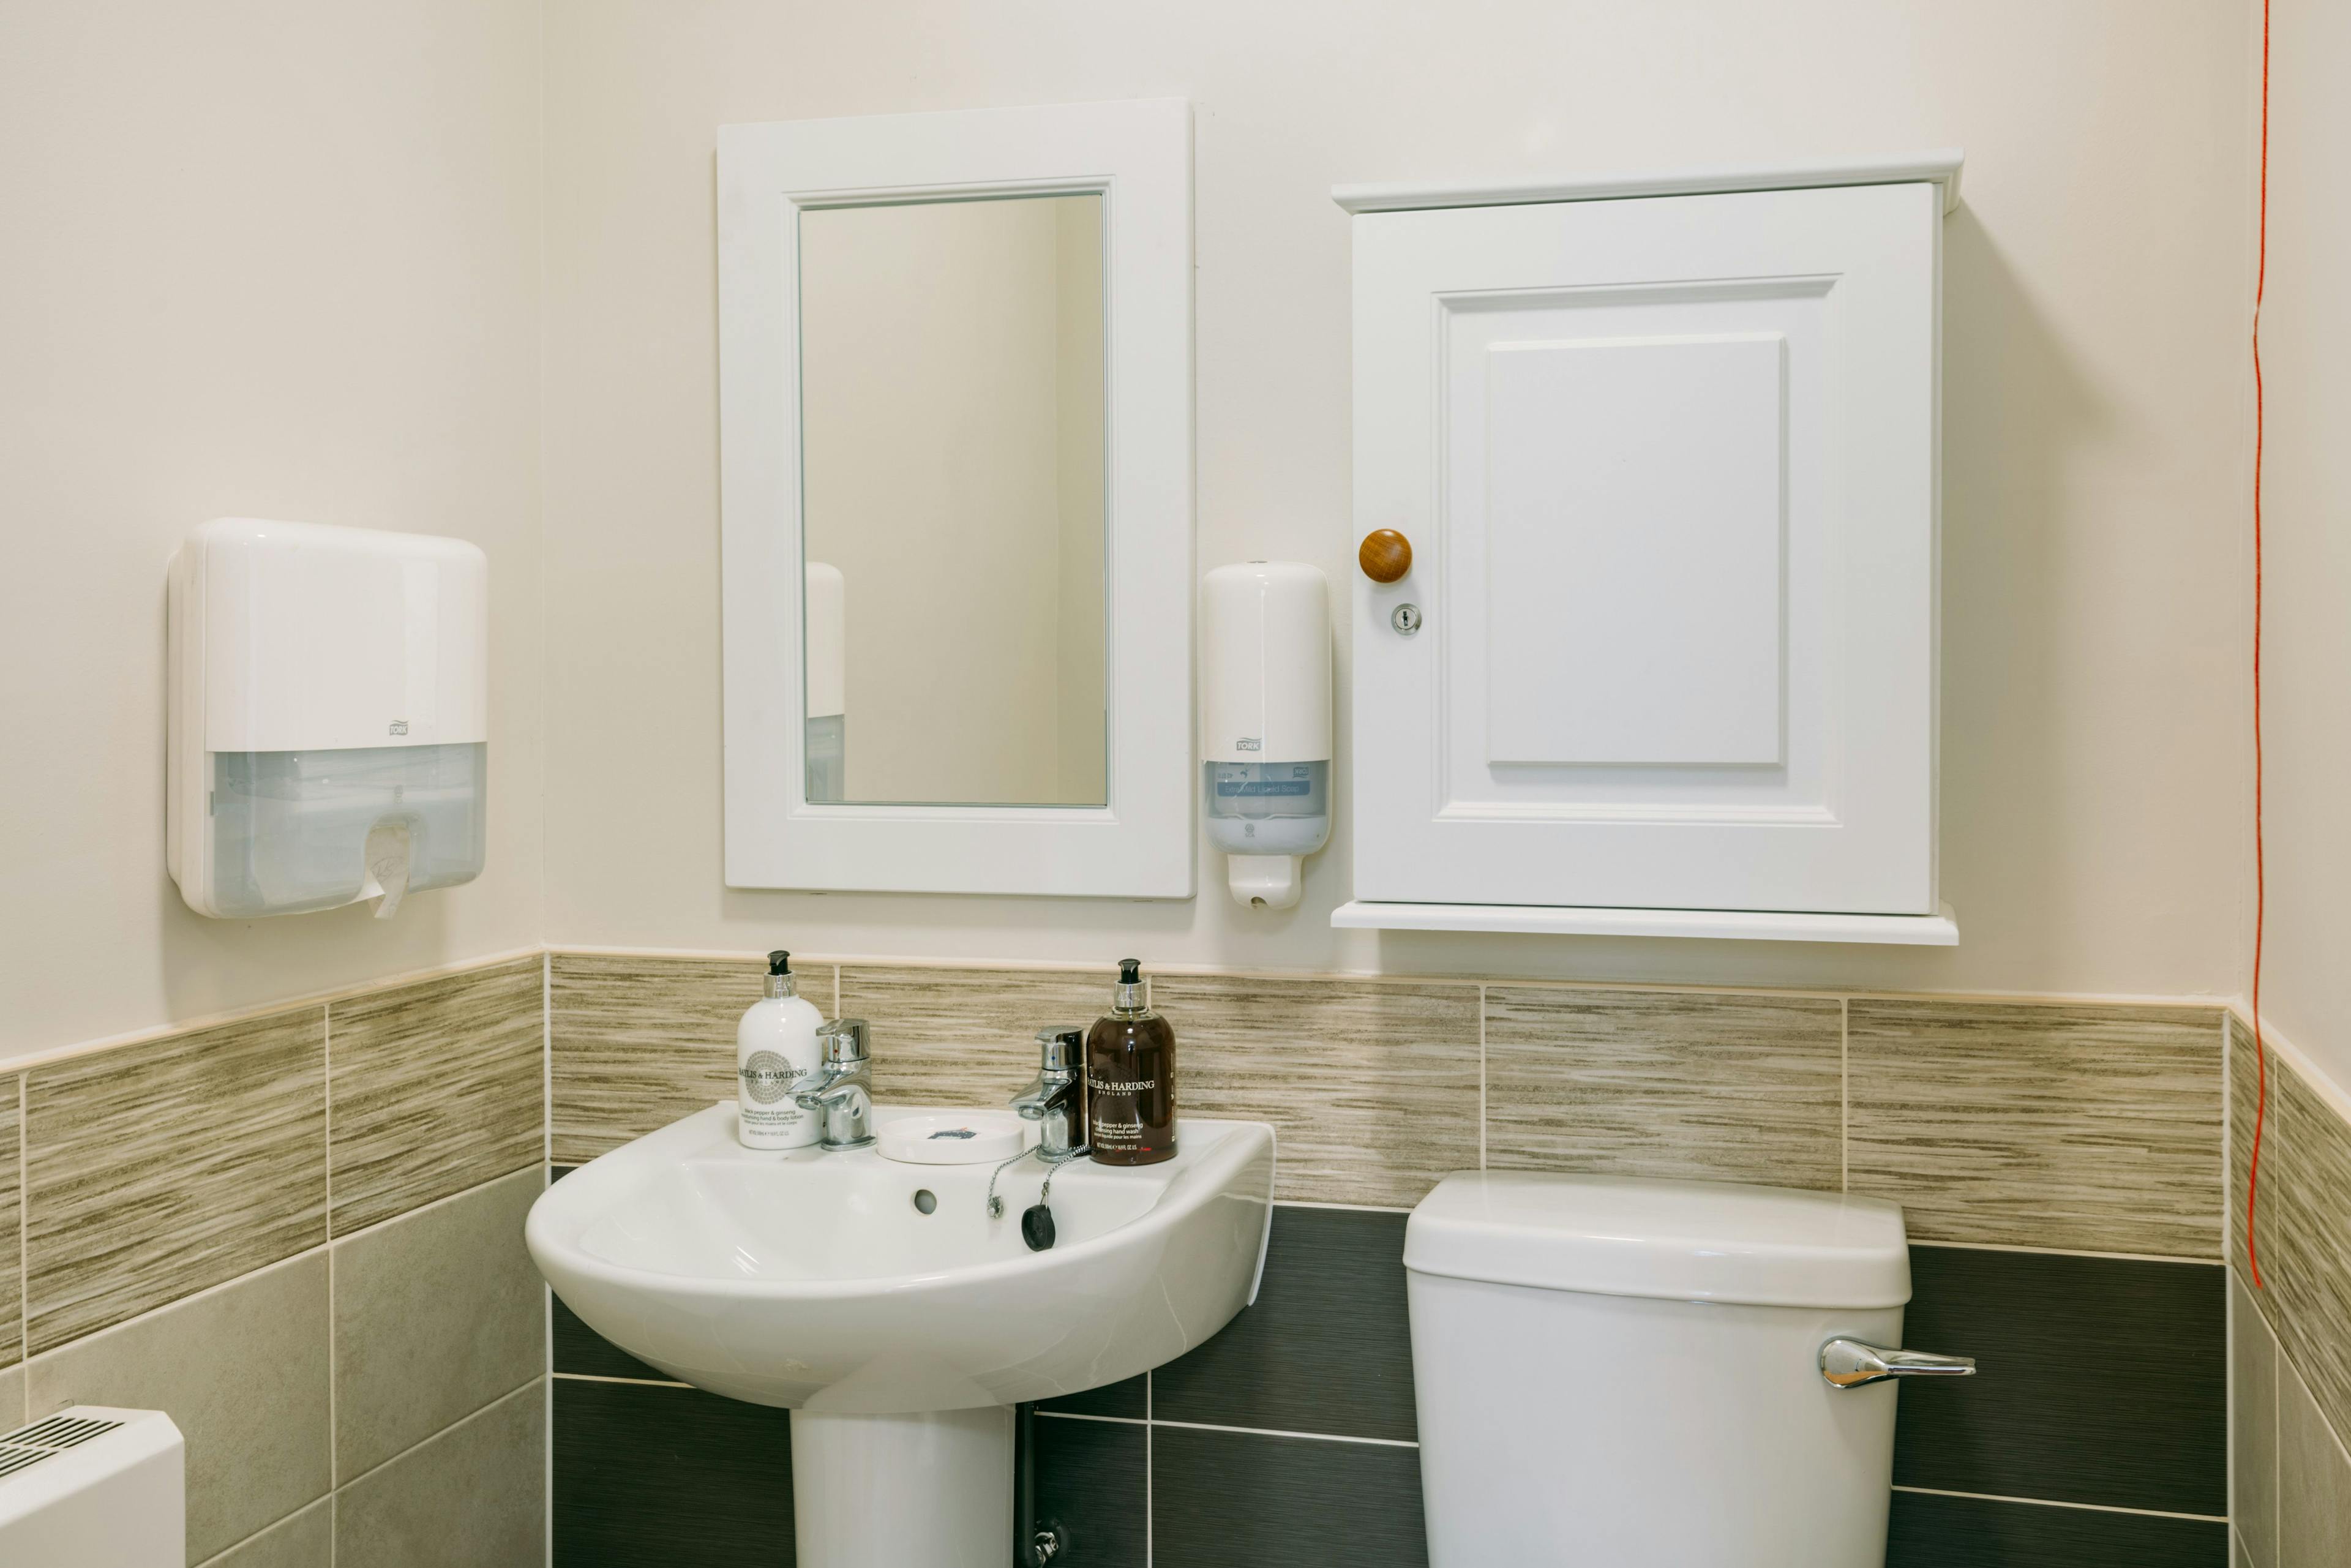 Bathroom at St Thomas Care Home in Basingstoke, Hampshire